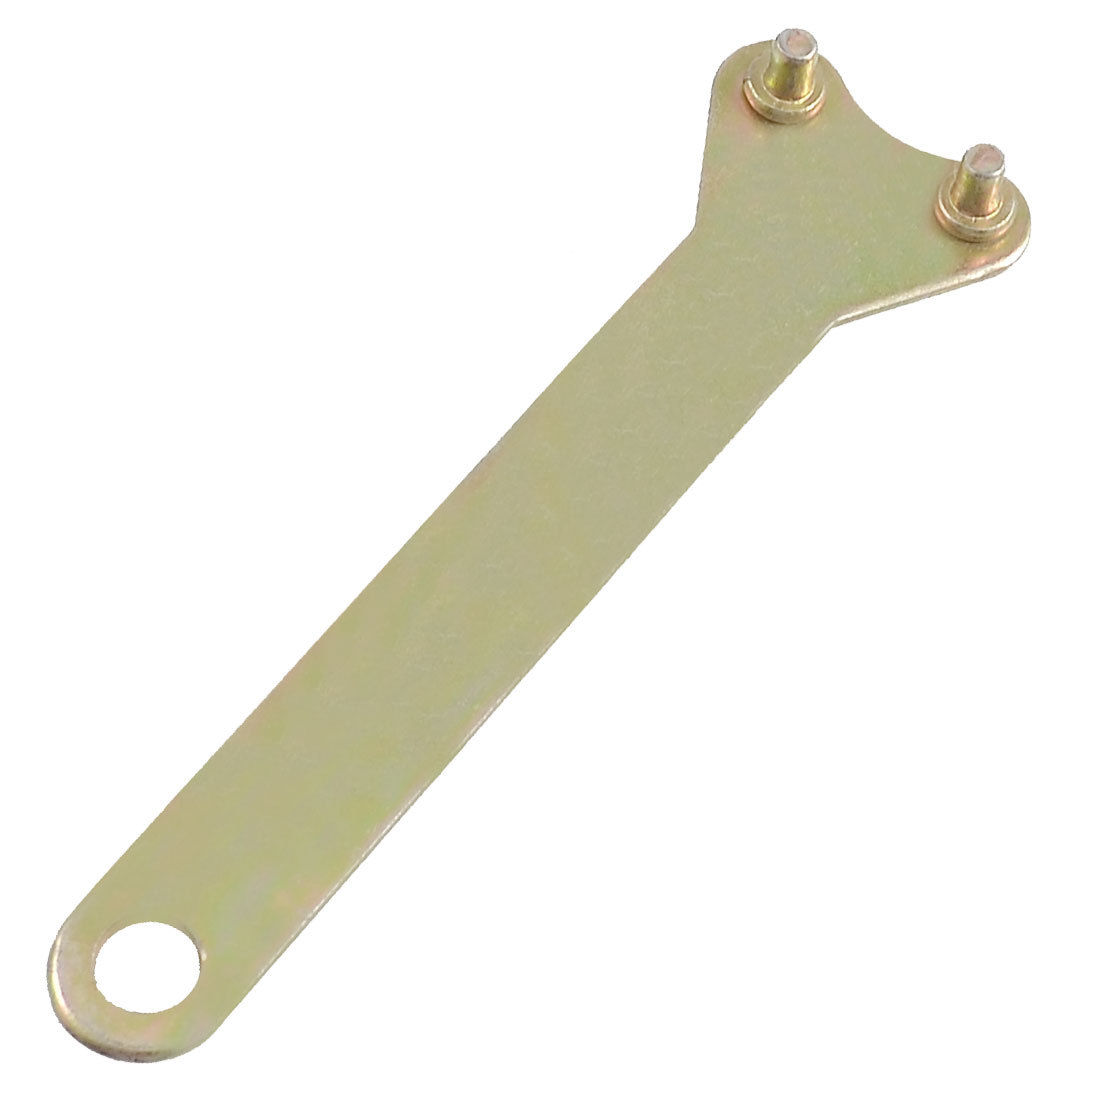 20mm-Metal-Angle-Grinder-Key-Flanged-Wrench-Spanner-1142784